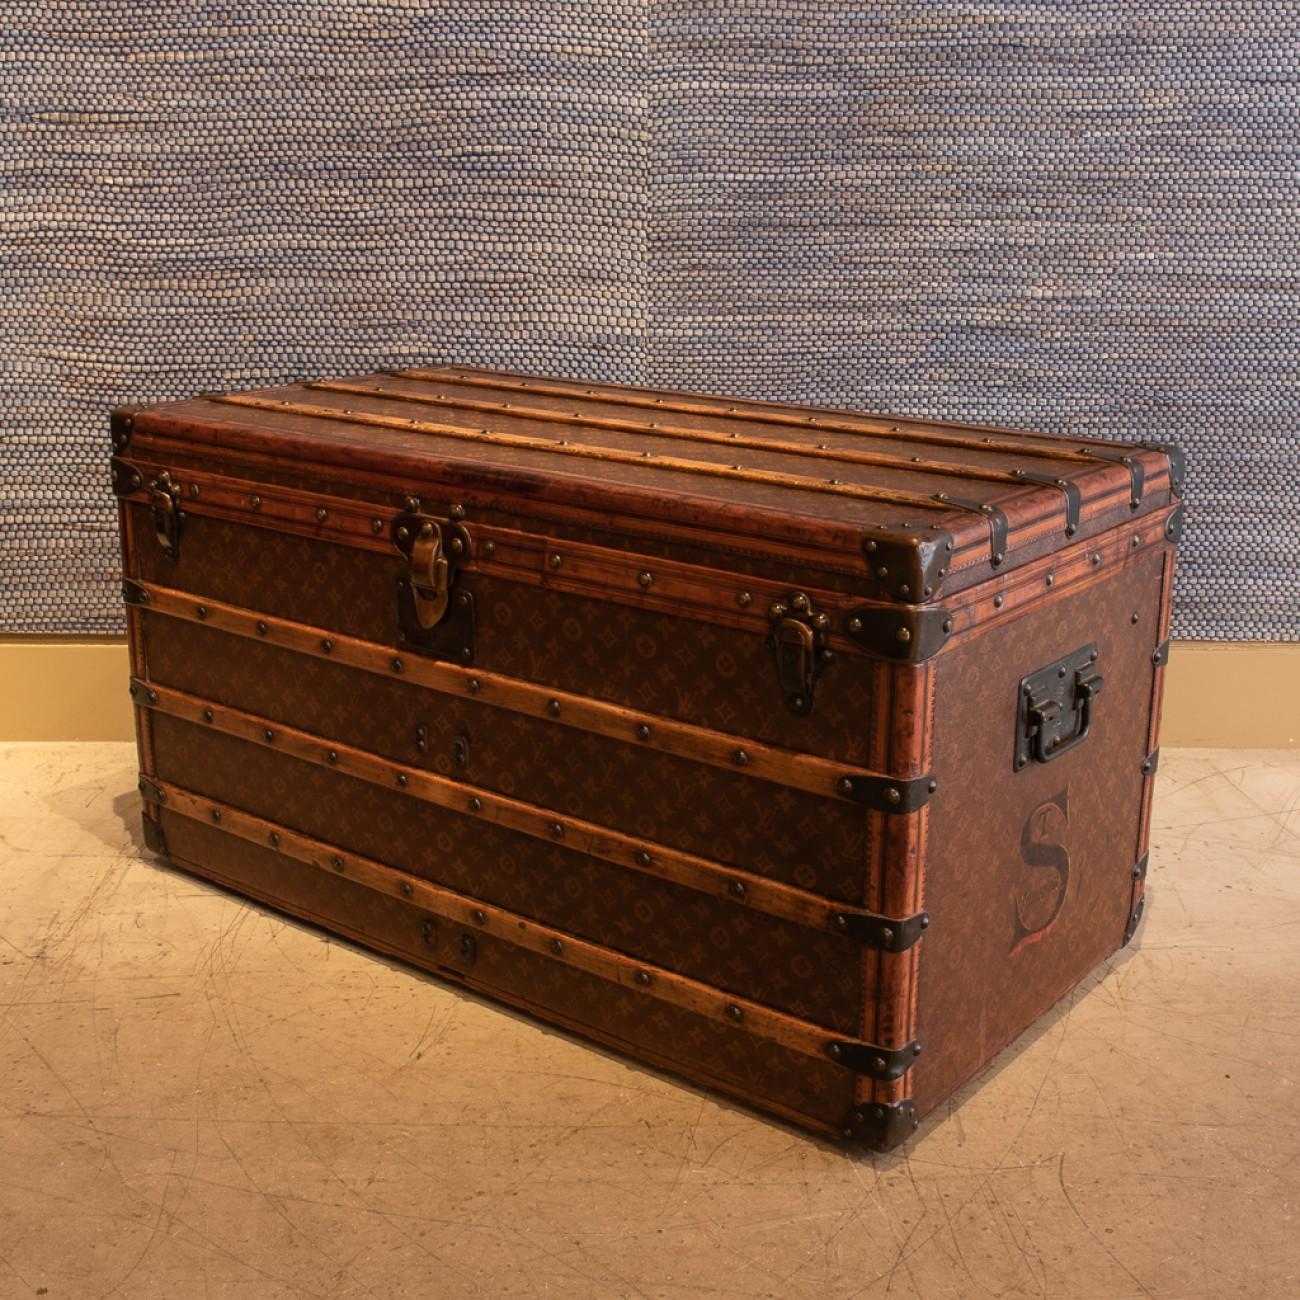 A lovely Louis Vuitton steamer trunk in monogram canvas with leather trim, patinated brass handles and fittings and original interior; minus the original trays, circa 1905.

Louis Vuitton was founded by its namesake in 1854, with the first shop on